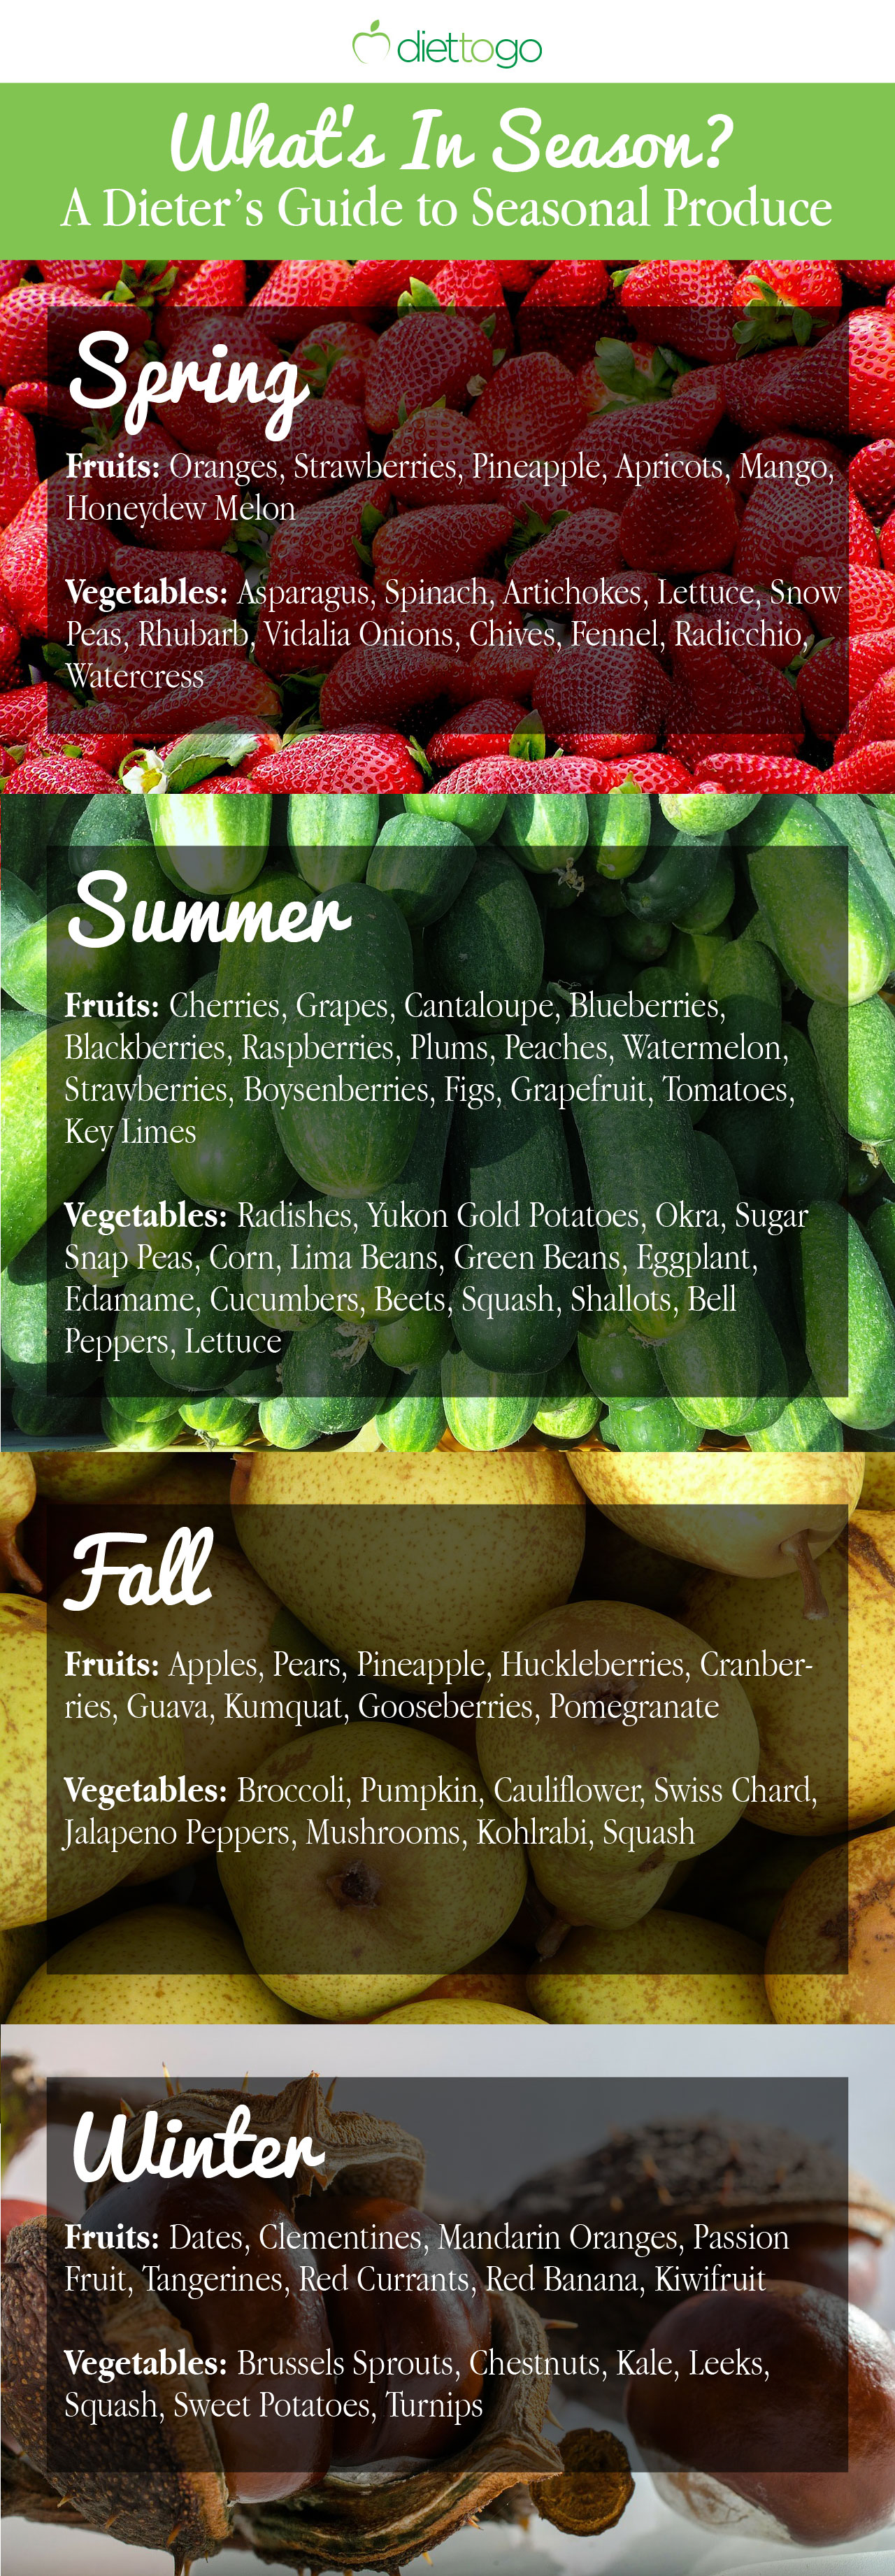 What's in season? A Dieter's Guide to Seasonal Produce